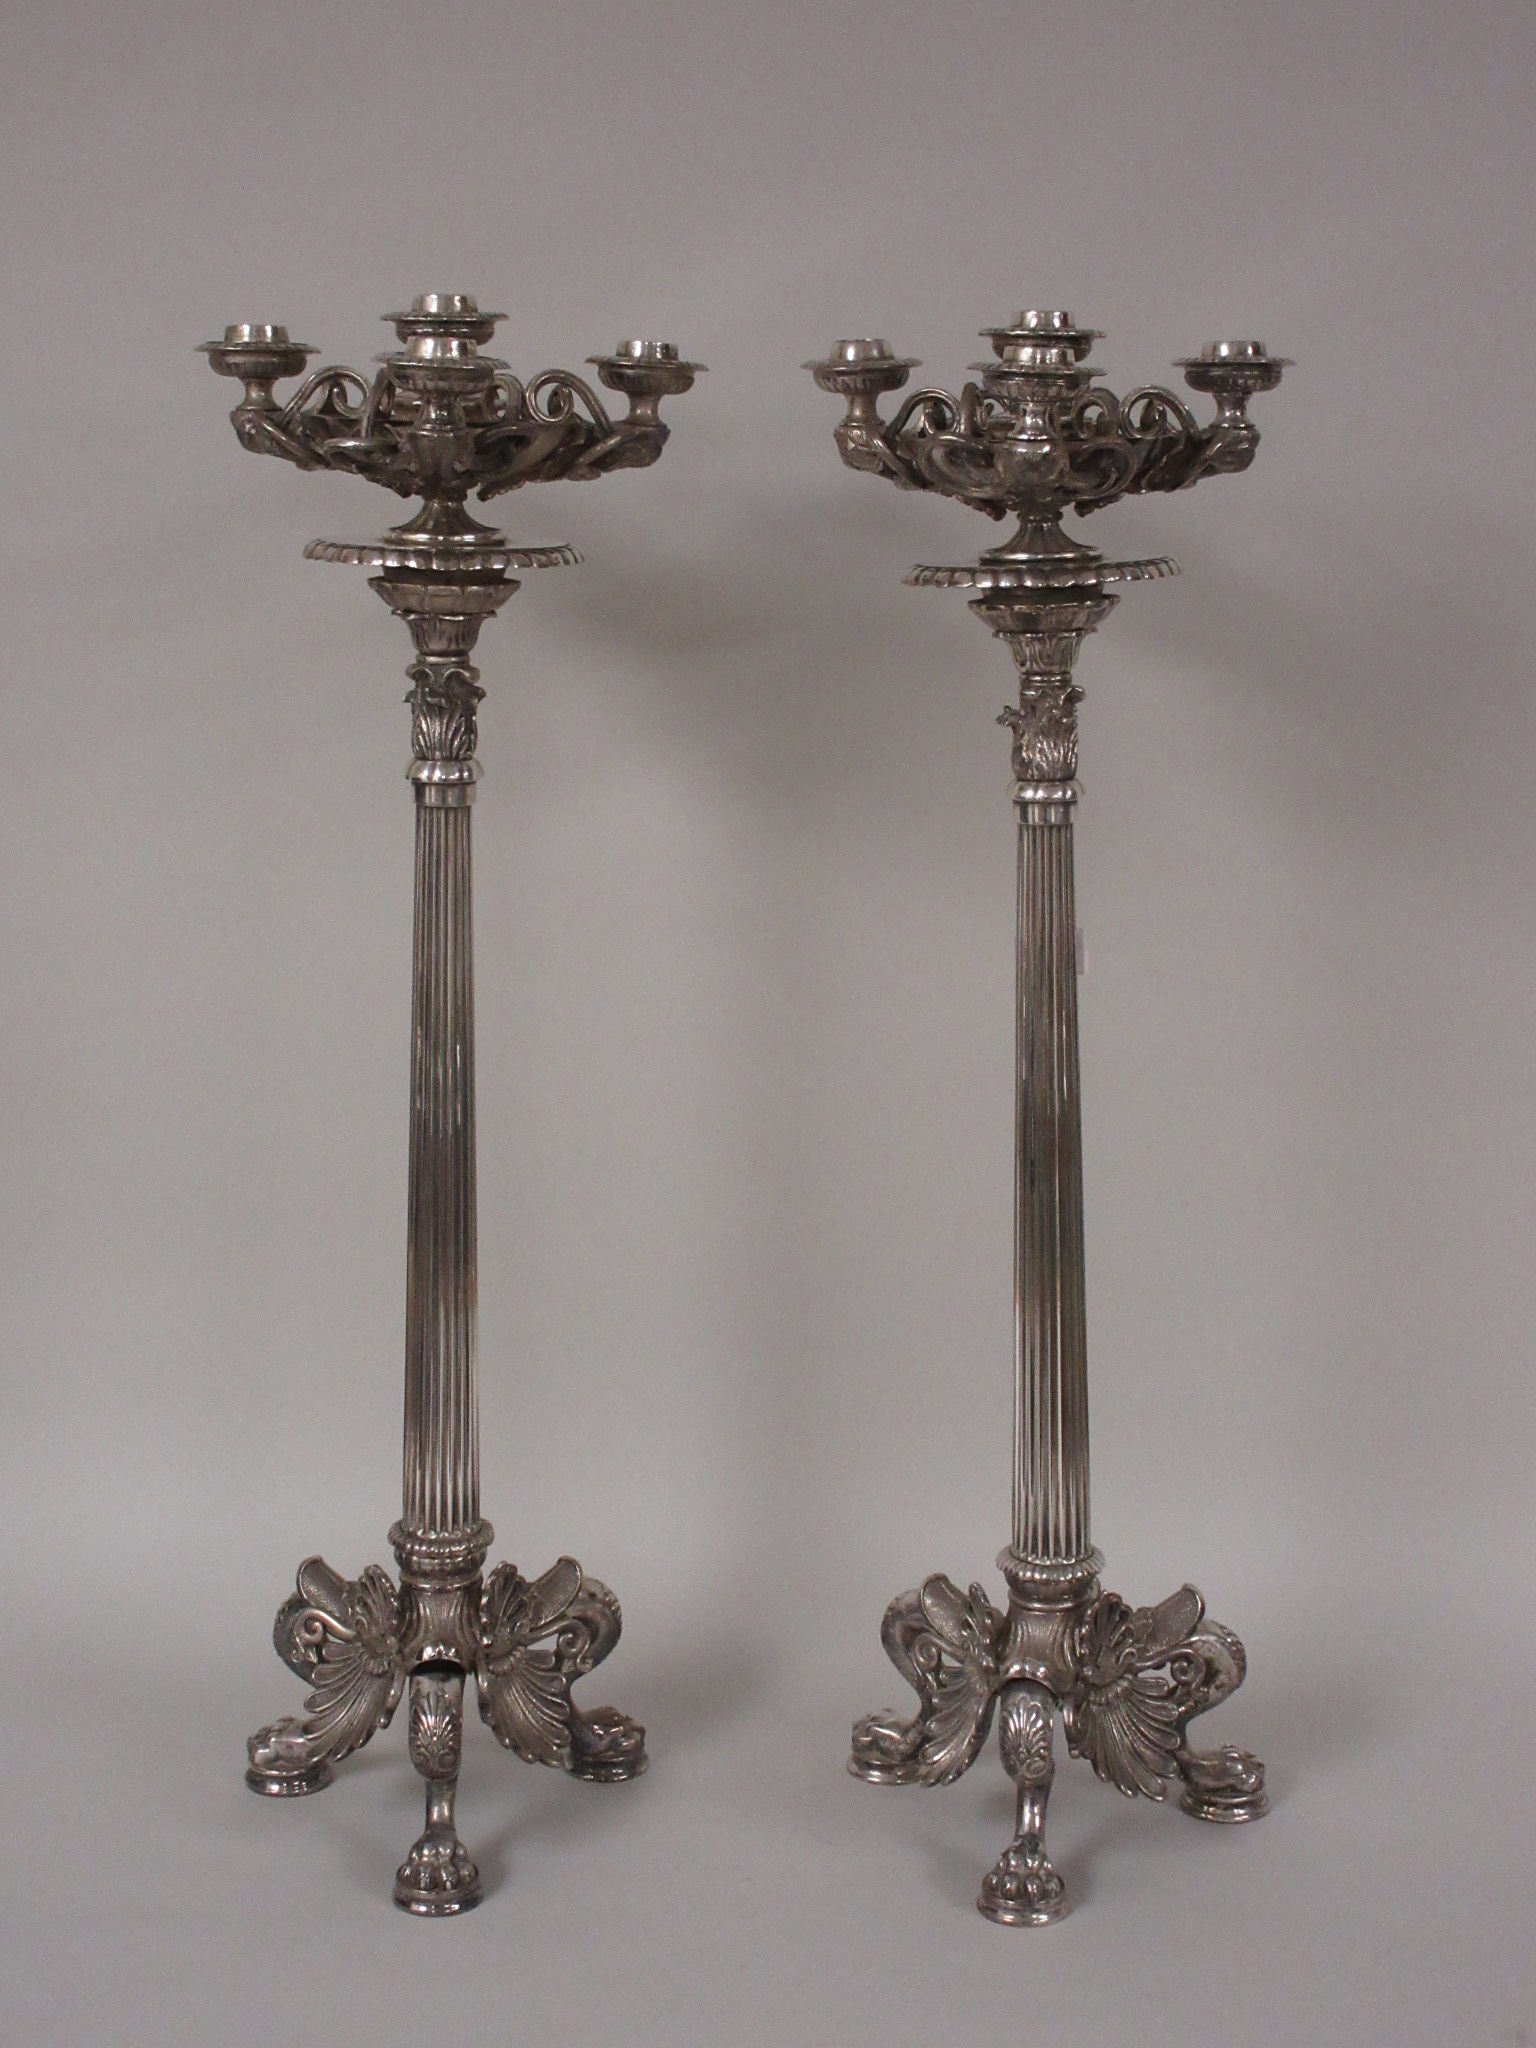 A pair of plated Table Candelabra on corinthian columns and three paw feet with scallop